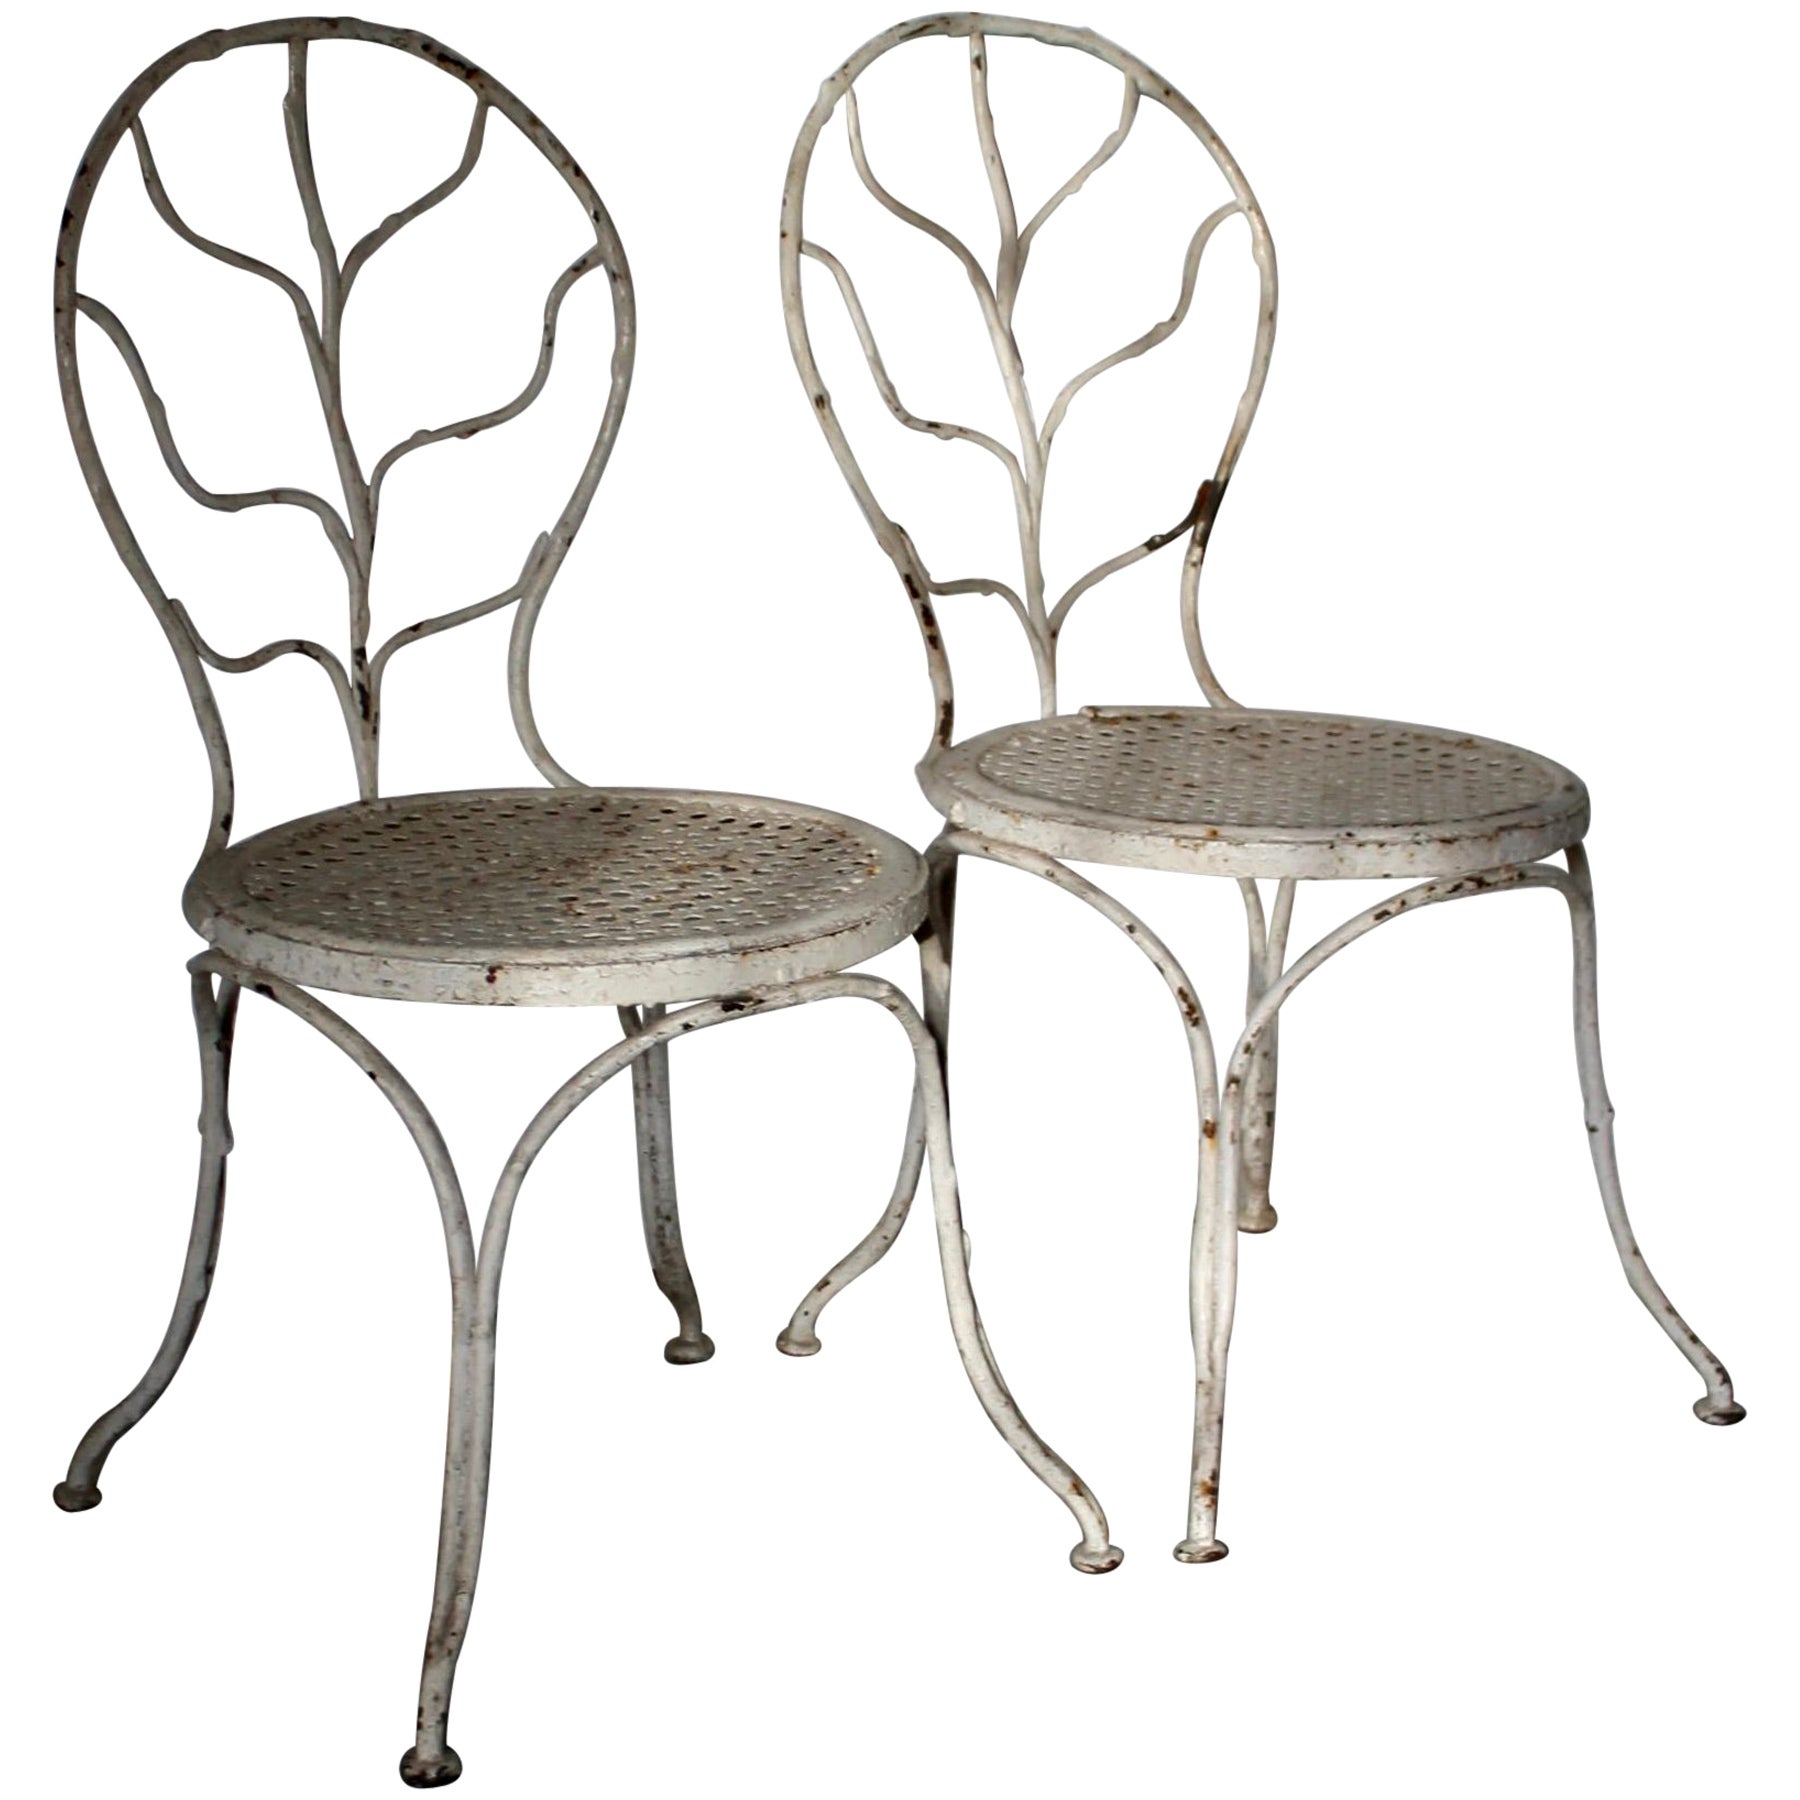 Durenne Foundries Garden Chairs in the style of Jean-Michel Frank